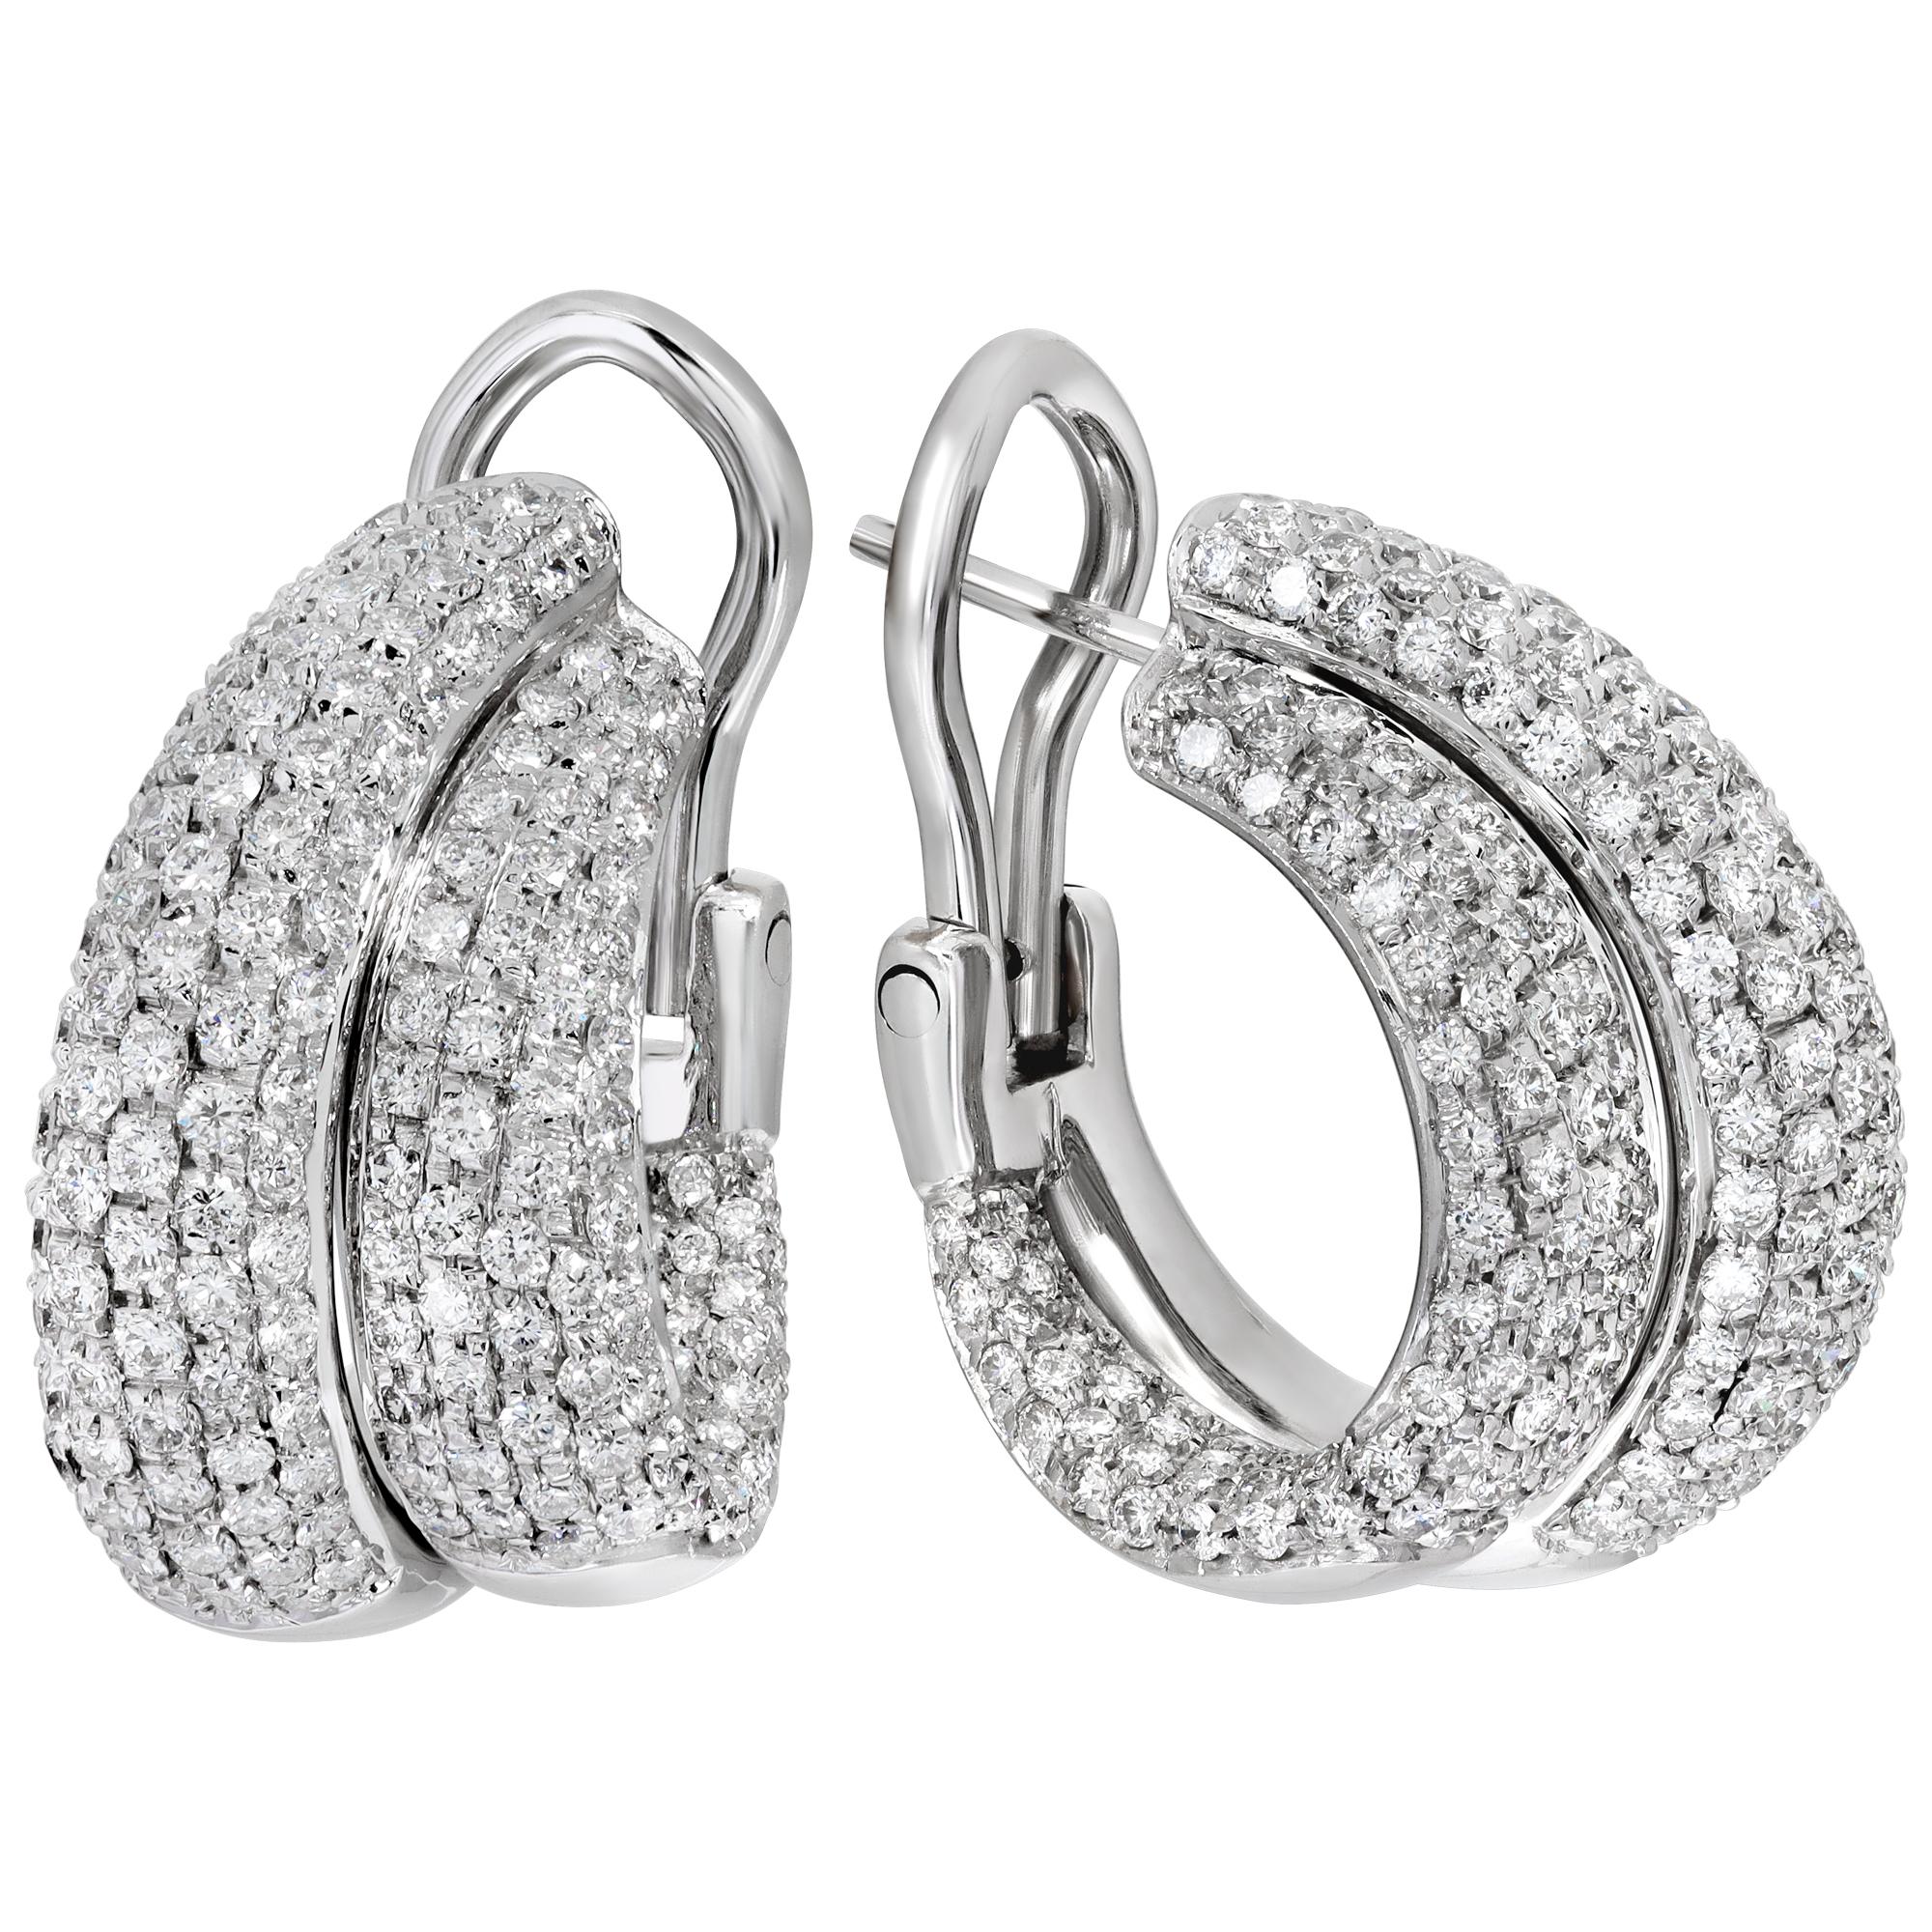 Double row of diamonds hoop earrings in 18k white gold. Round brilliant cut diamonds total approx. weight 6.50 carats, estimate: H-I color SI clarity. Omega clip with post. Hanging length: 20mm.